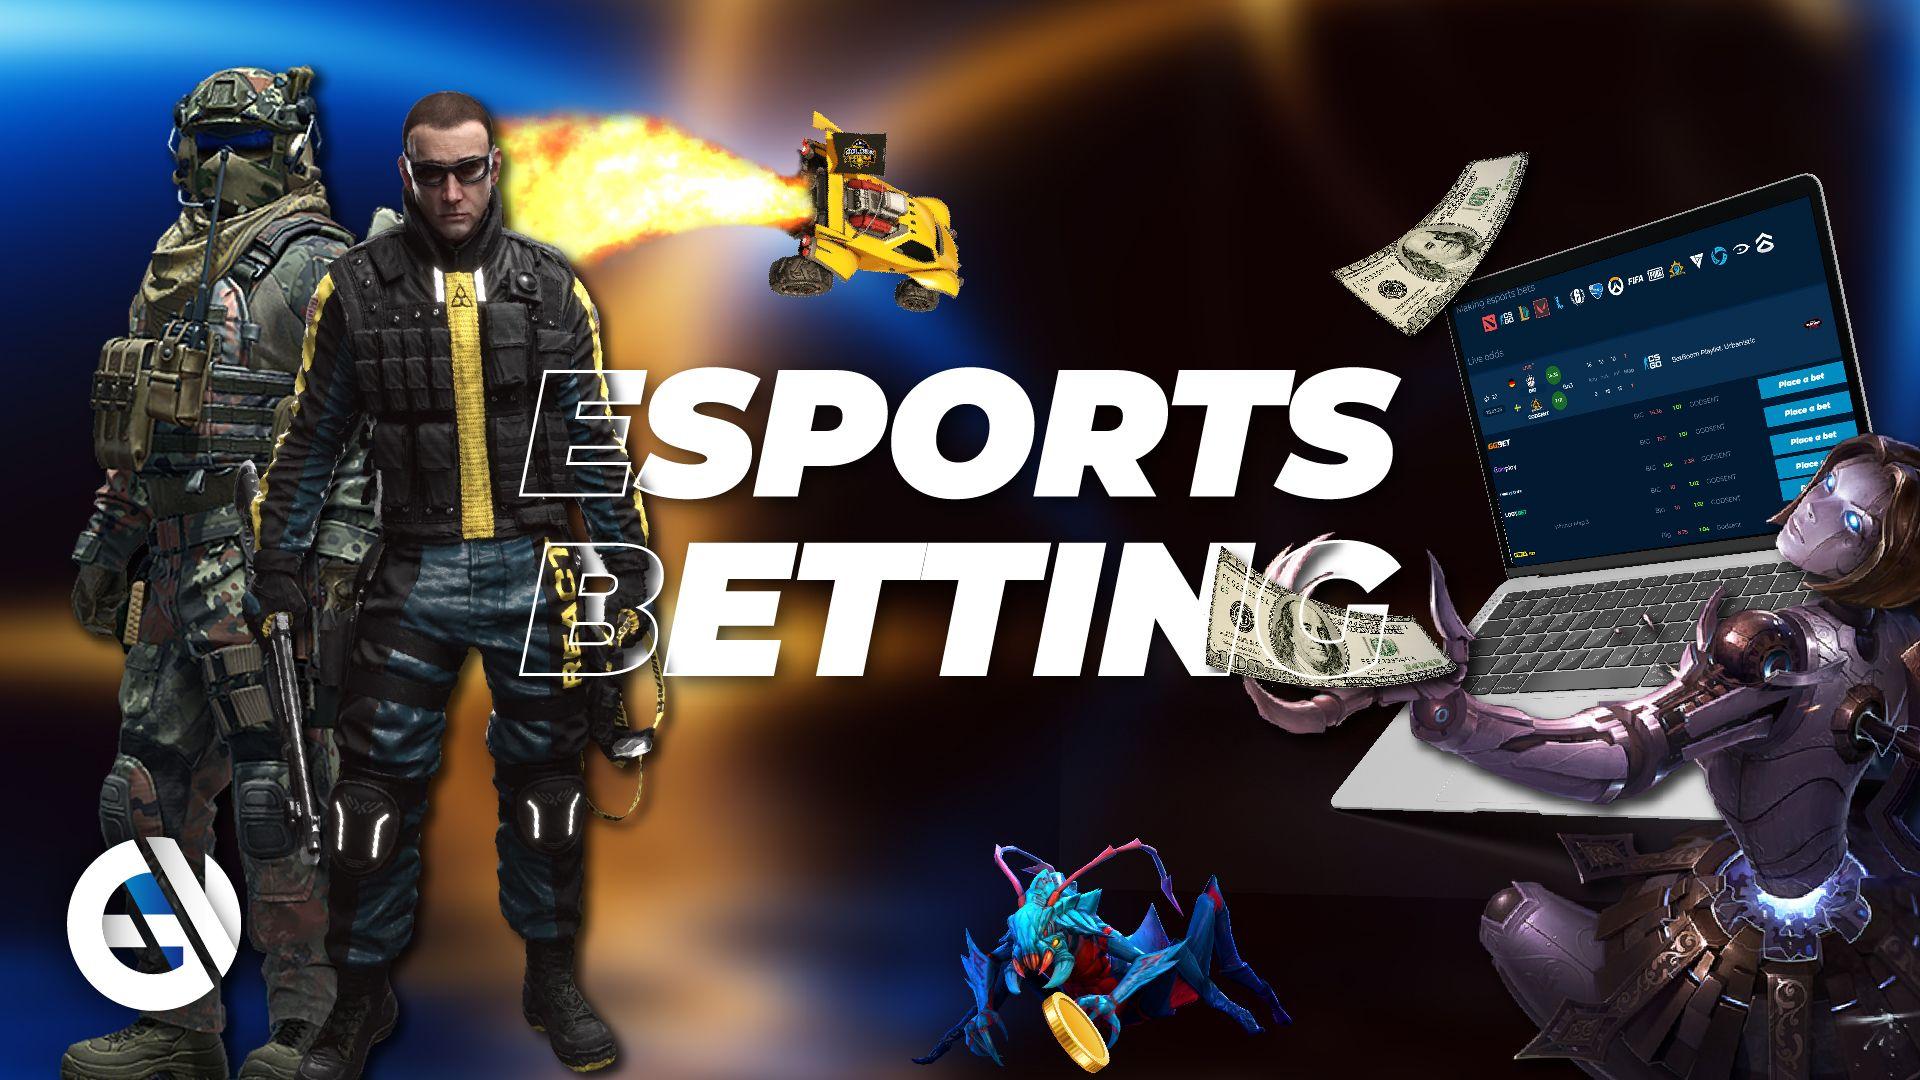 What to know about safe esports betting